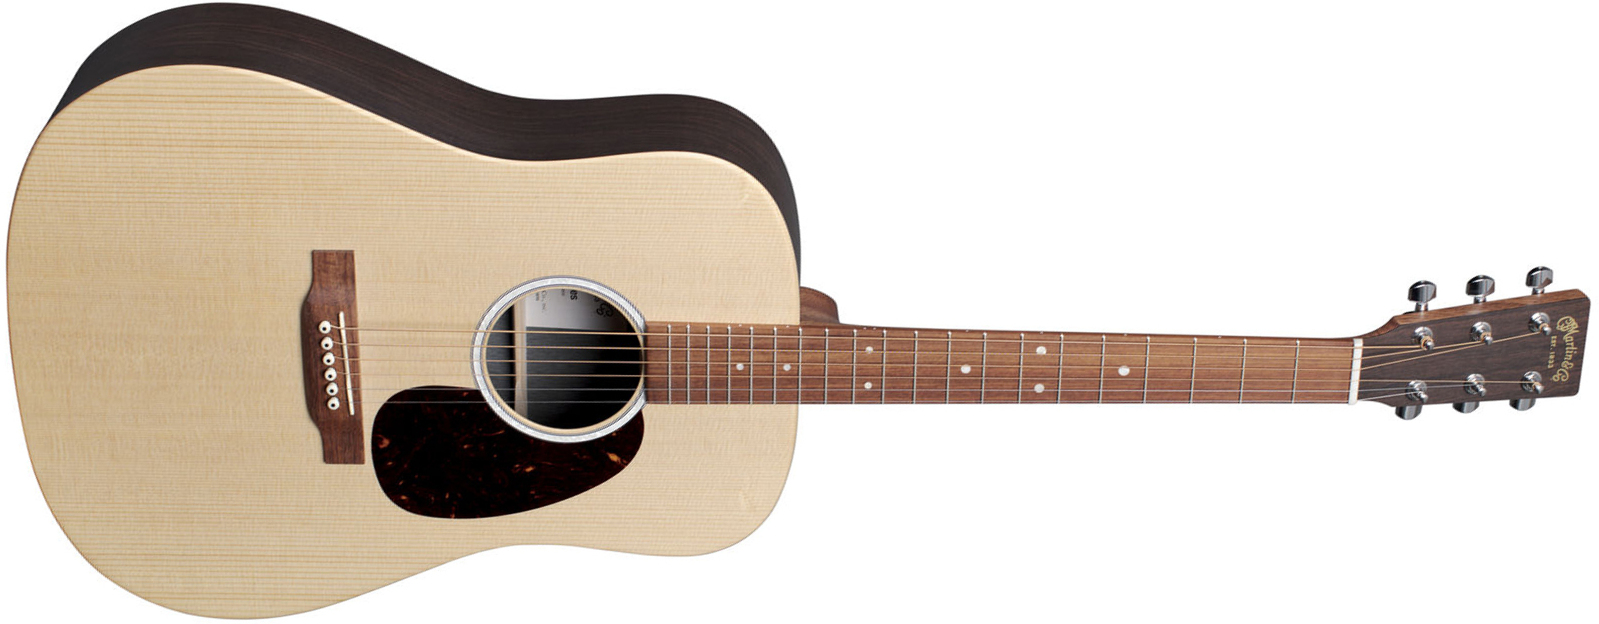 Martin D-x2e Rosewood Dreadnought Epicea Palissandre - Natural Satin - Electro acoustic guitar - Main picture